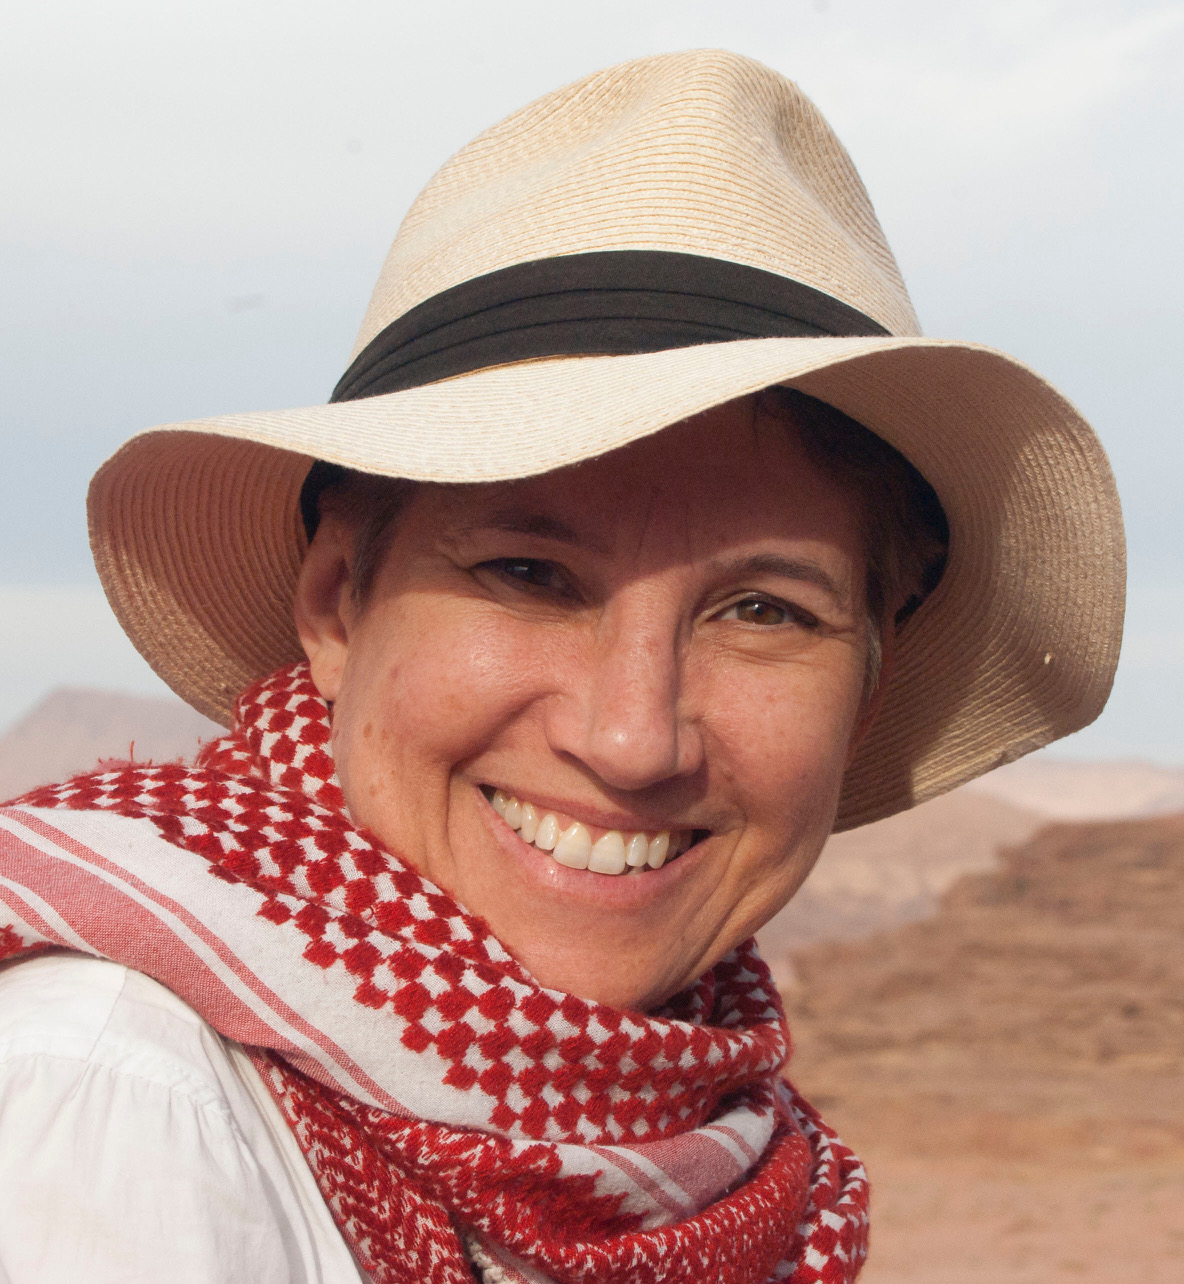 Karin Sowada appointed Director of Australian Centre for Egyptology